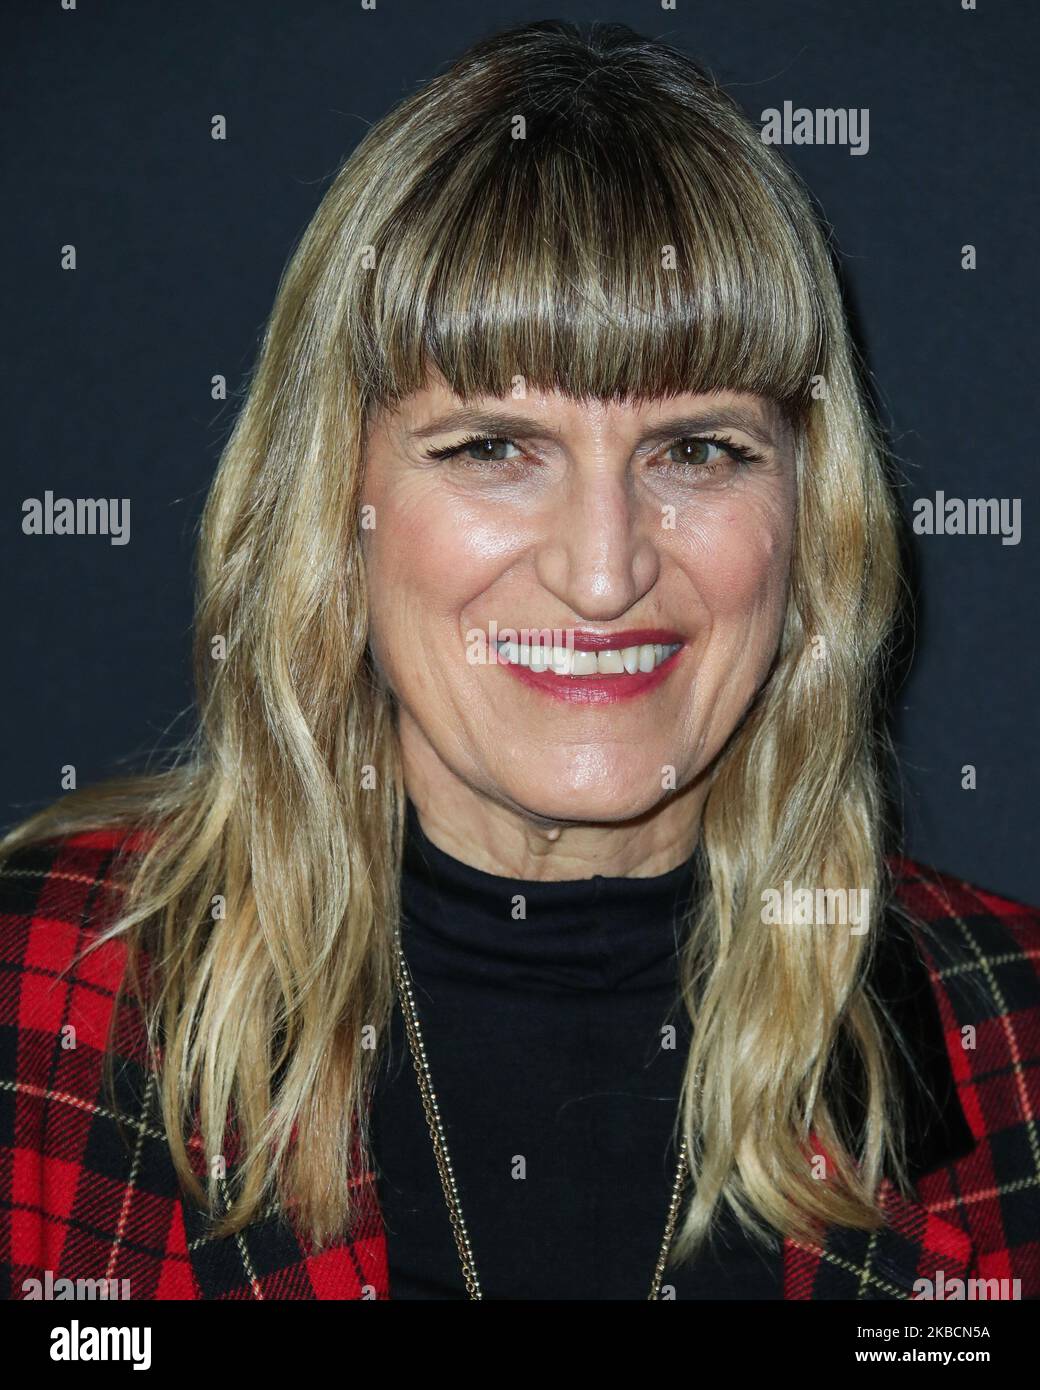 HOLLYWOOD, LOS ANGELES, CALIFORNIA, USA - DECEMBER 11: Director Catherine Hardwicke arrives at the Los Angeles Premiere Of A24's 'Uncut Gems' held at the ArcLight Cinerama Dome on December 11, 2019 in Hollywood, Los Angeles, California, United States. (Photo by Xavier Collin/Image Press Agency/NurPhoto) Stock Photo